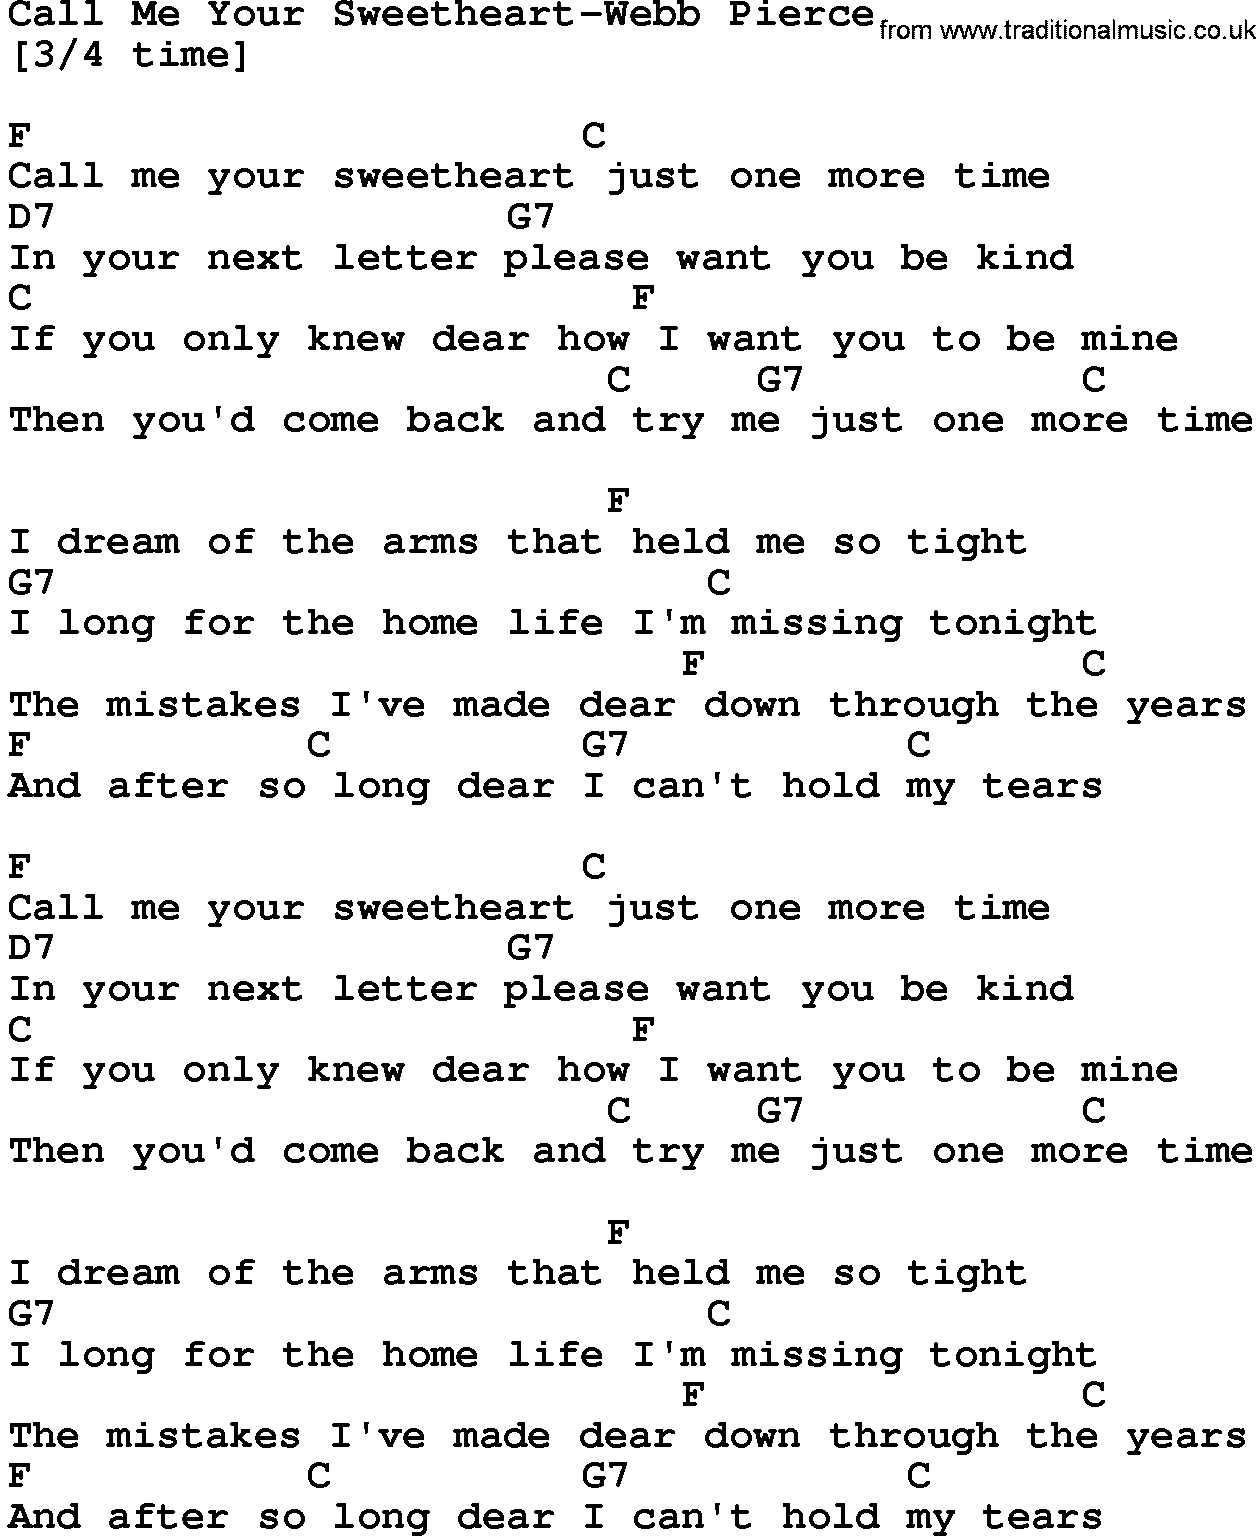 Country music song: Call Me Your Sweetheart-Webb Pierce lyrics and chords